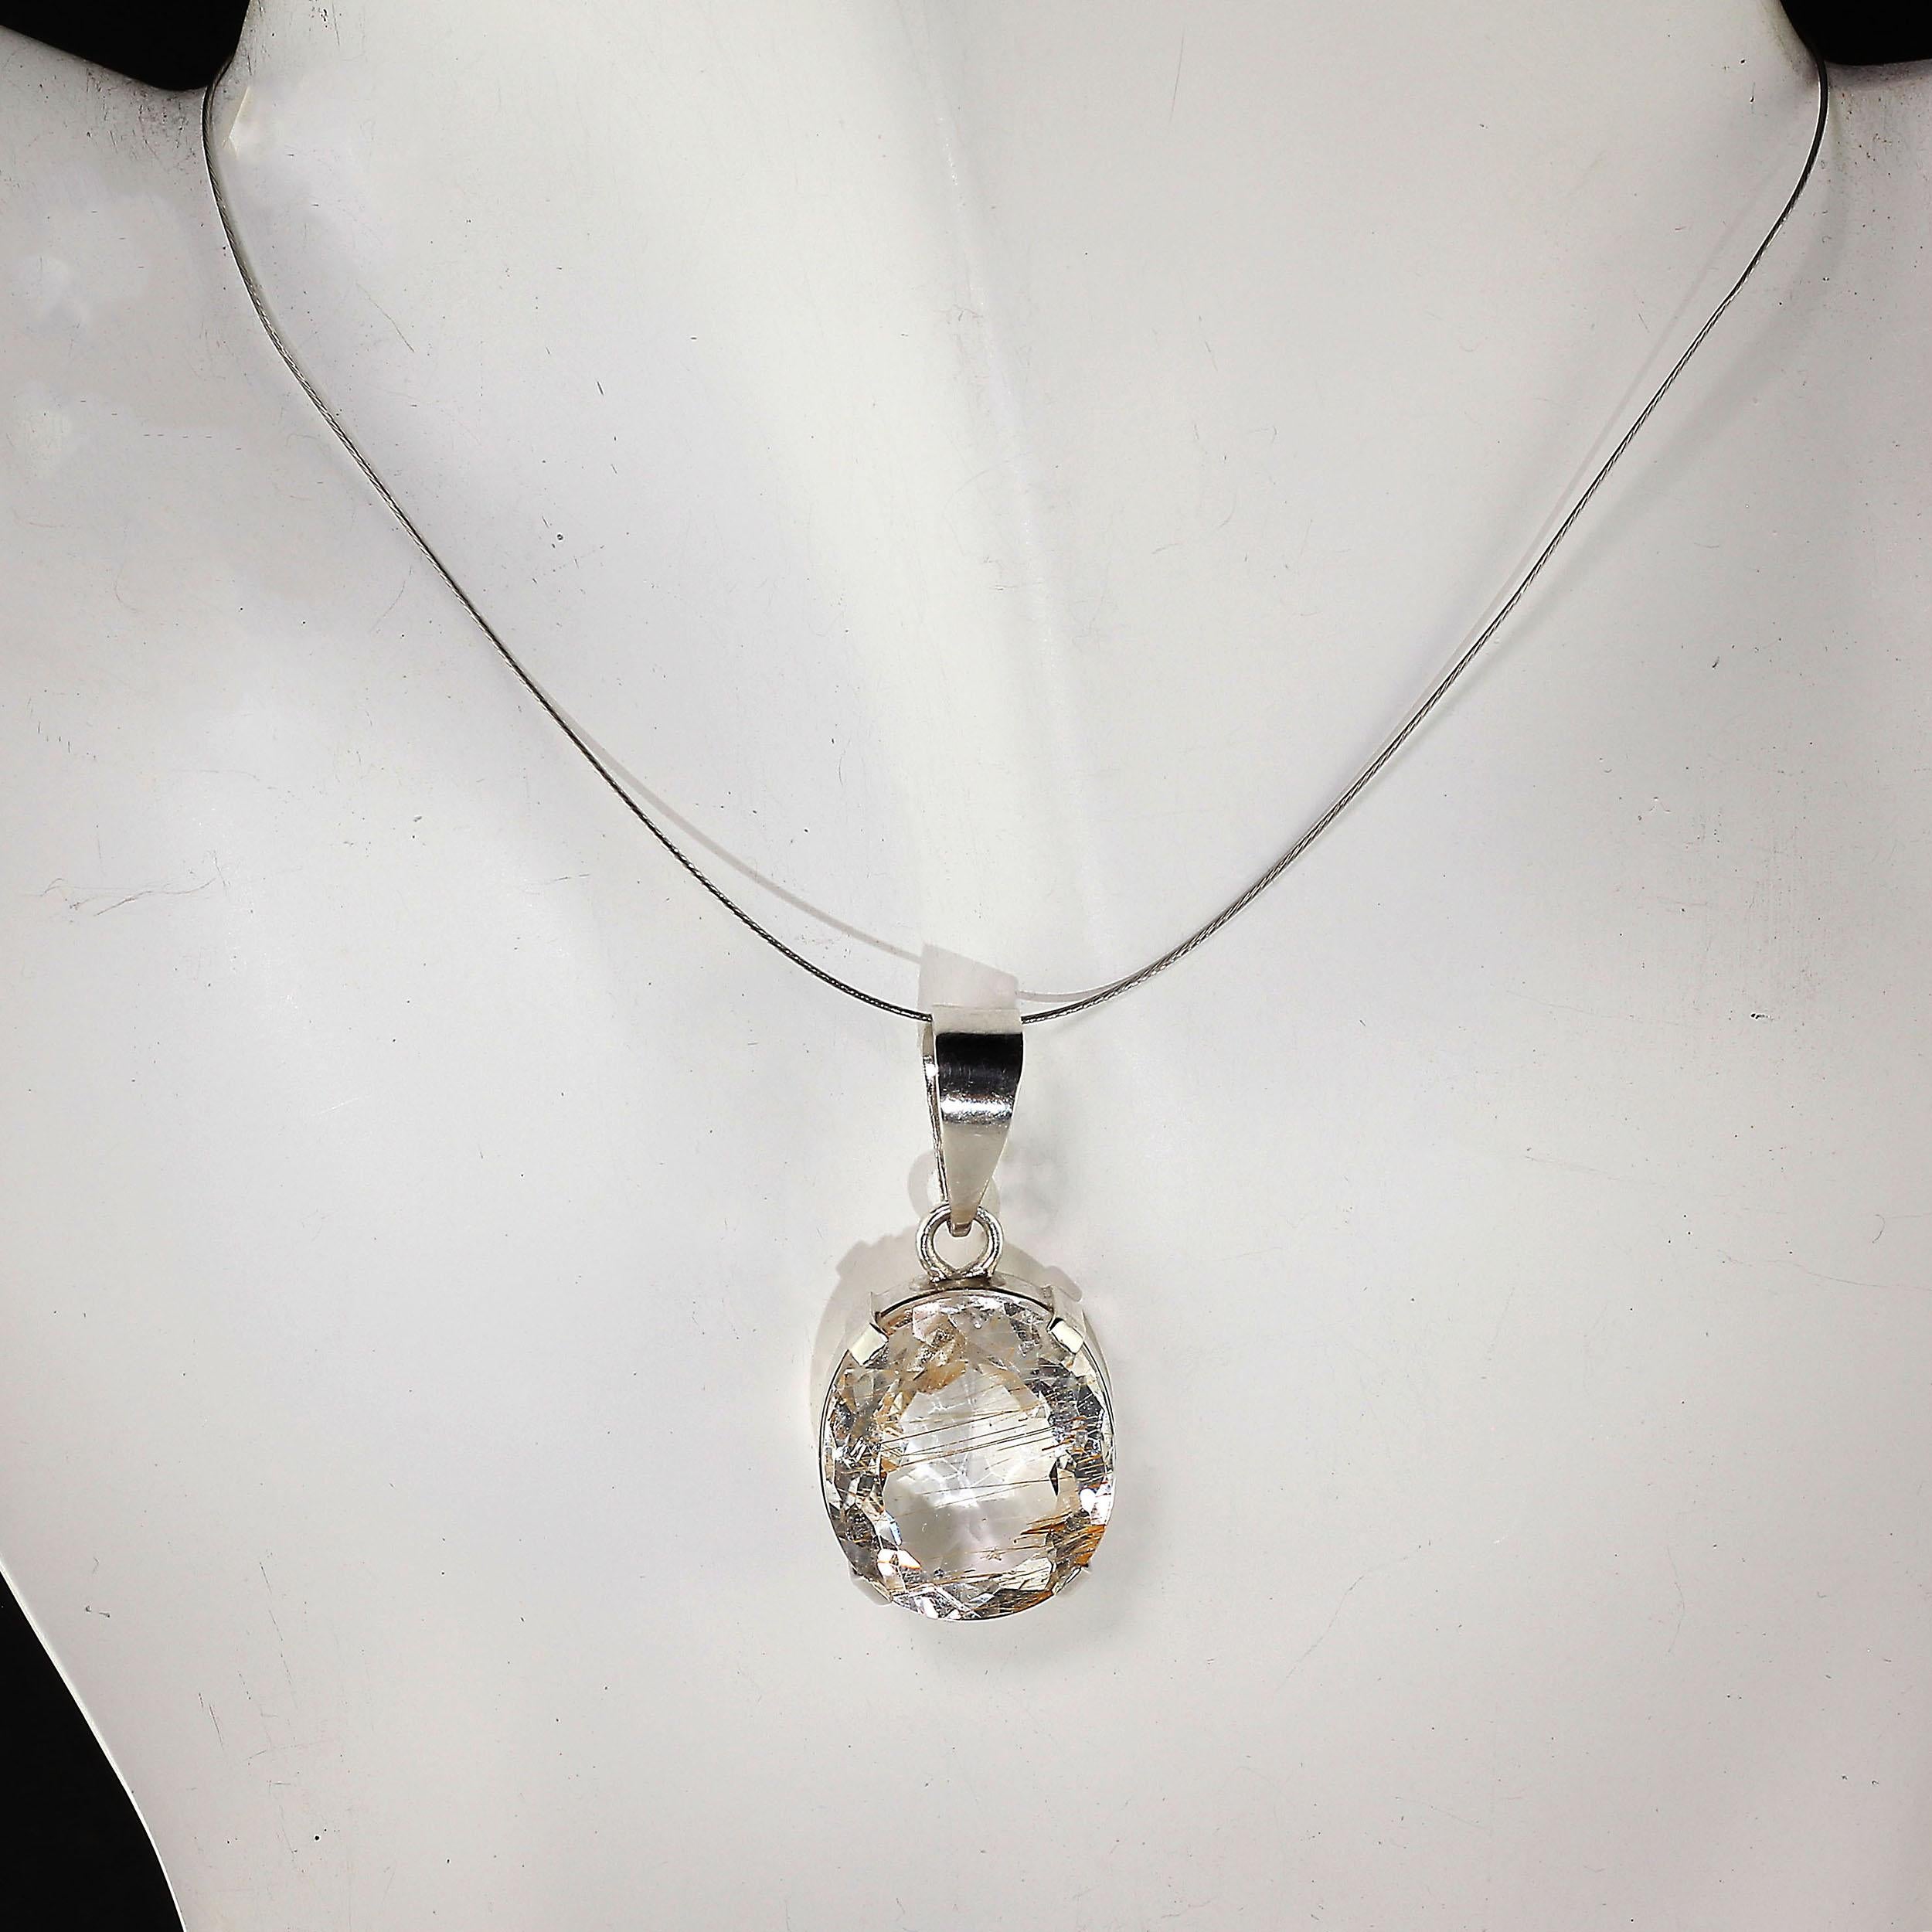 Brazilian Quartz Crystal Pendant with Rutile in Sterling Silver Setting 3